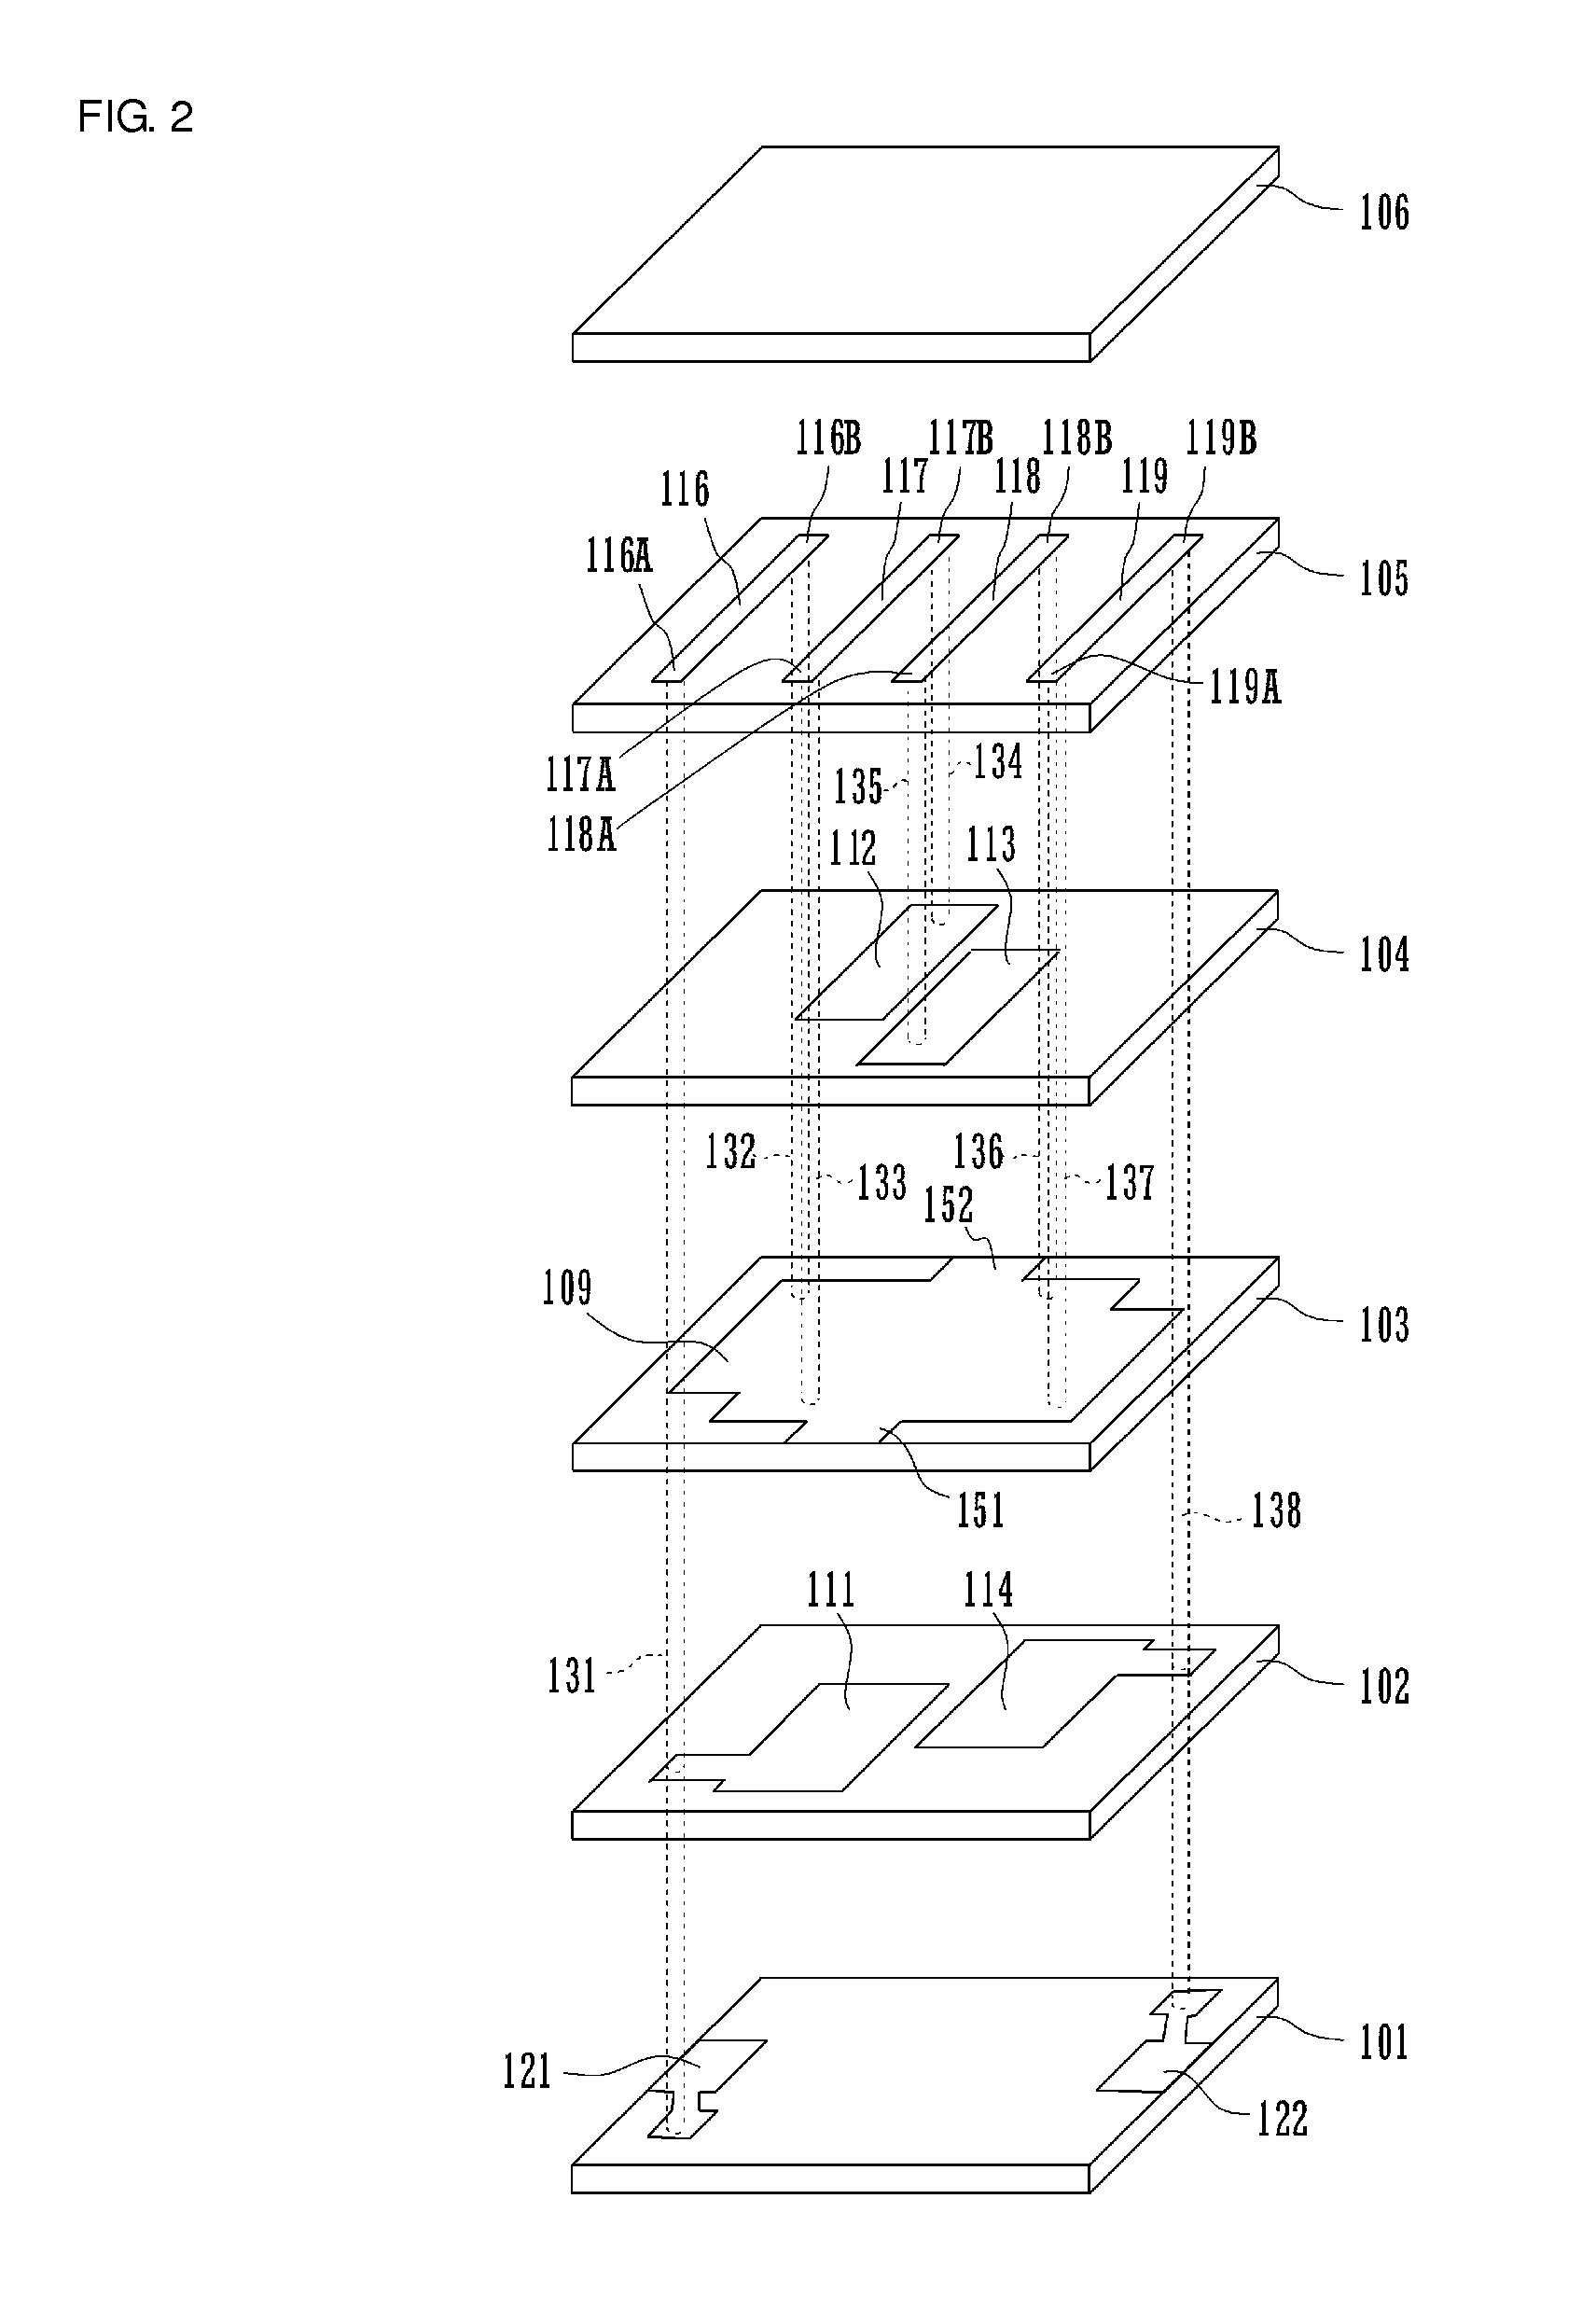 Laminated band-pass filter having an even number of LC parallel resonators